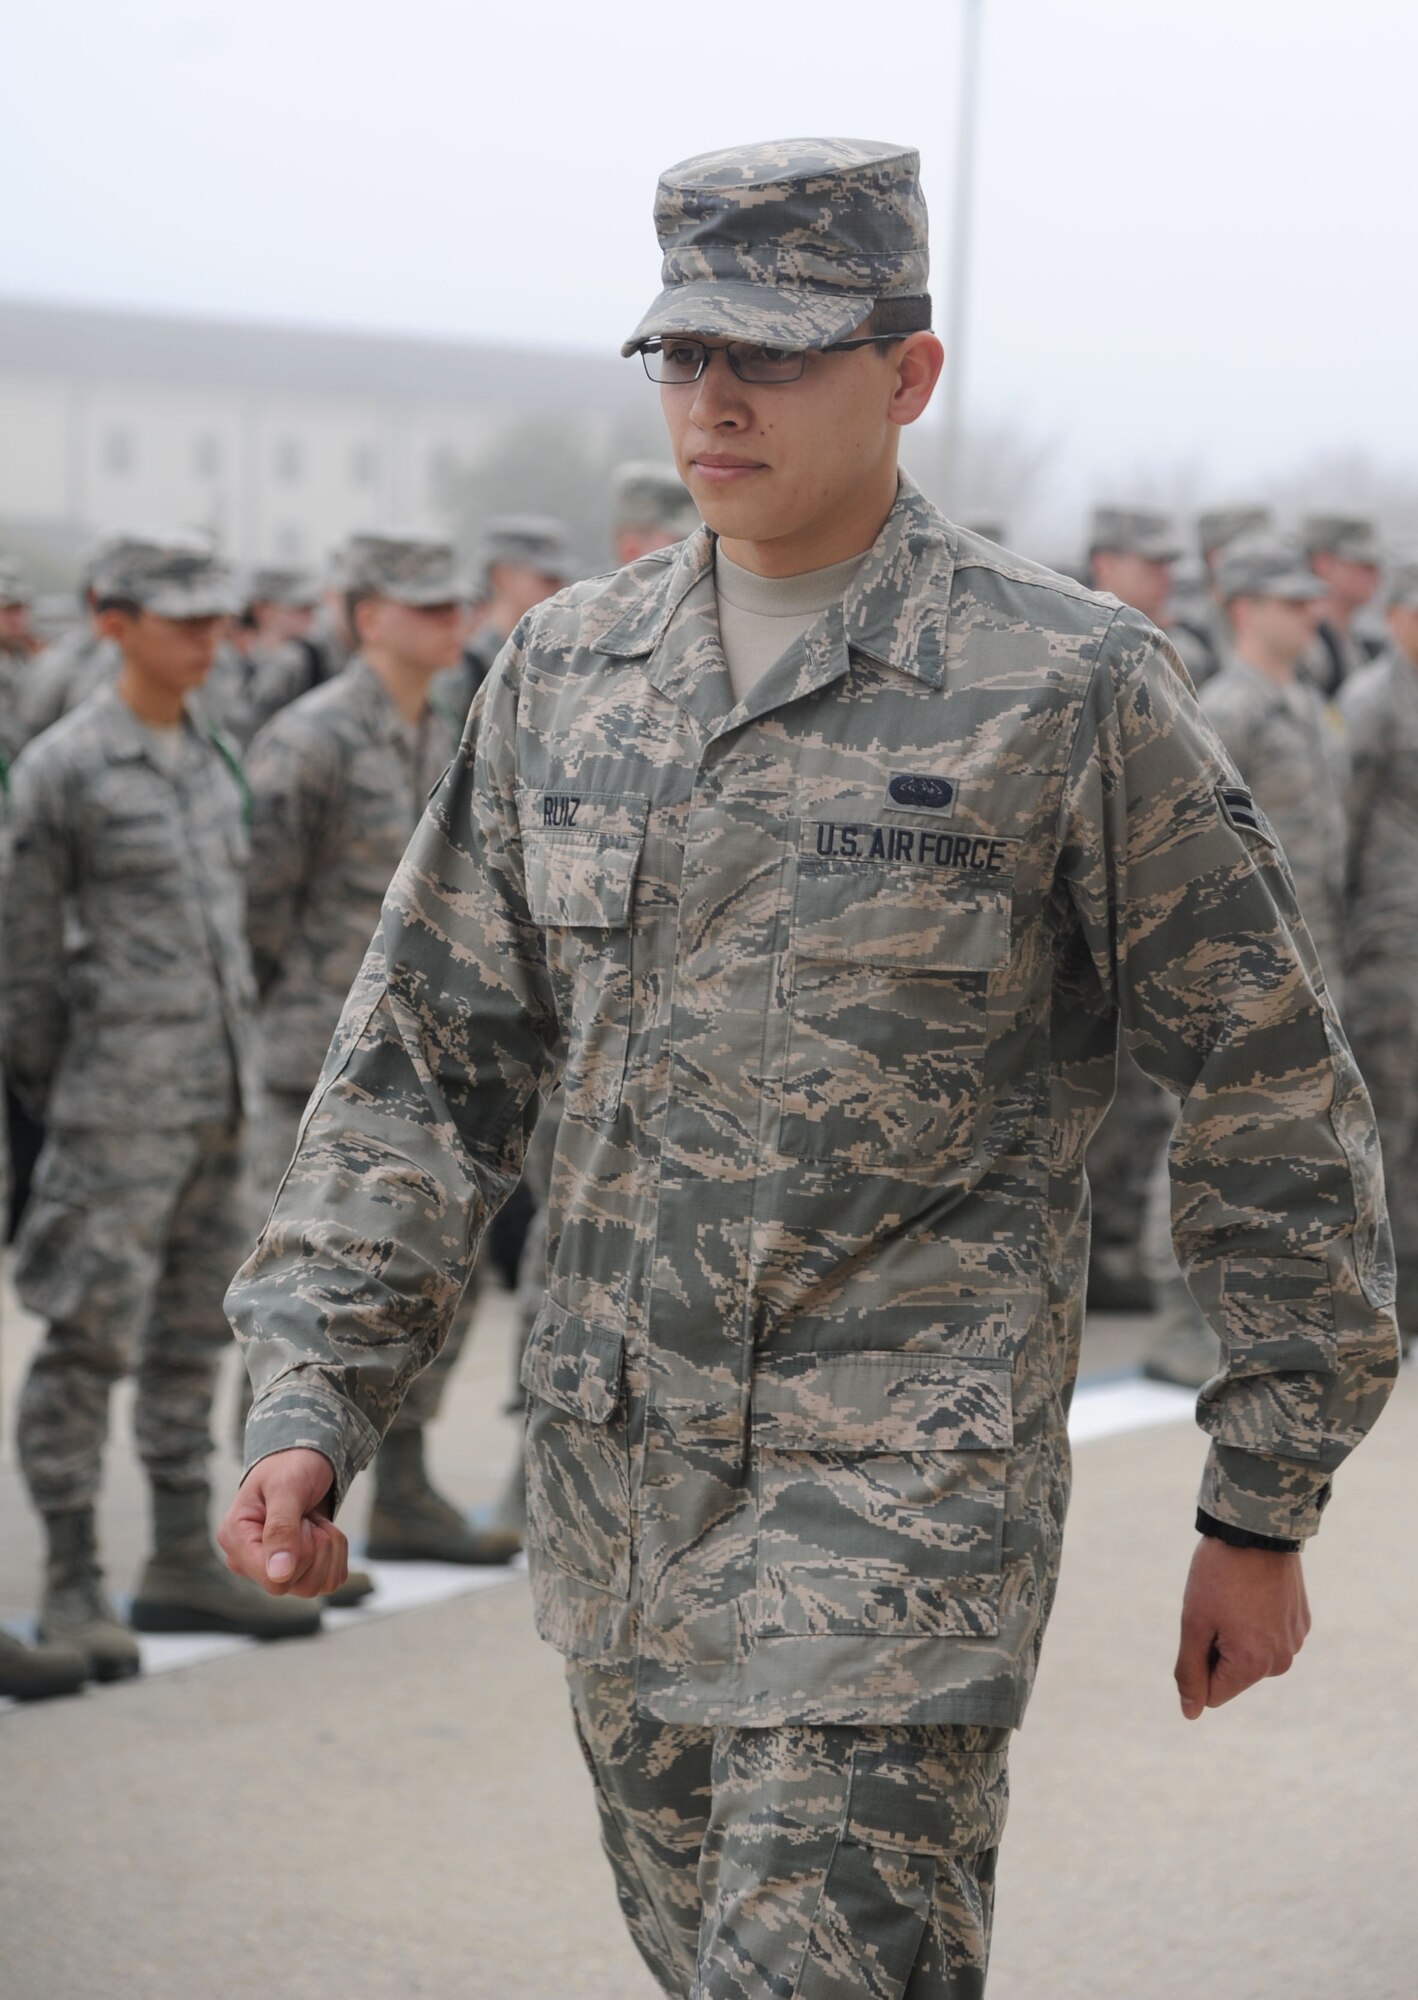 Airman First Class Javier Ruiz, 336th Training Squadron, marches in front of Airmen Feb. 4, 2014, at the Levitow Training Support Facility, Keesler Air Force Base, Miss.  He is the 81st Training Group’s Airman of the Month for January.  Ruiz, from Ludington, Mich., is currently training in the cyber surety apprentice course.  The four squadrons that train nonprior service students each select one Airman to compete at a monthly group board. The Airmen respond to questions about customs and courtesies, dress and appearance, enlisted force development and current events from that week’s issue of the Keesler News.  (U.S. Air Force photo by Kemberly Groue)